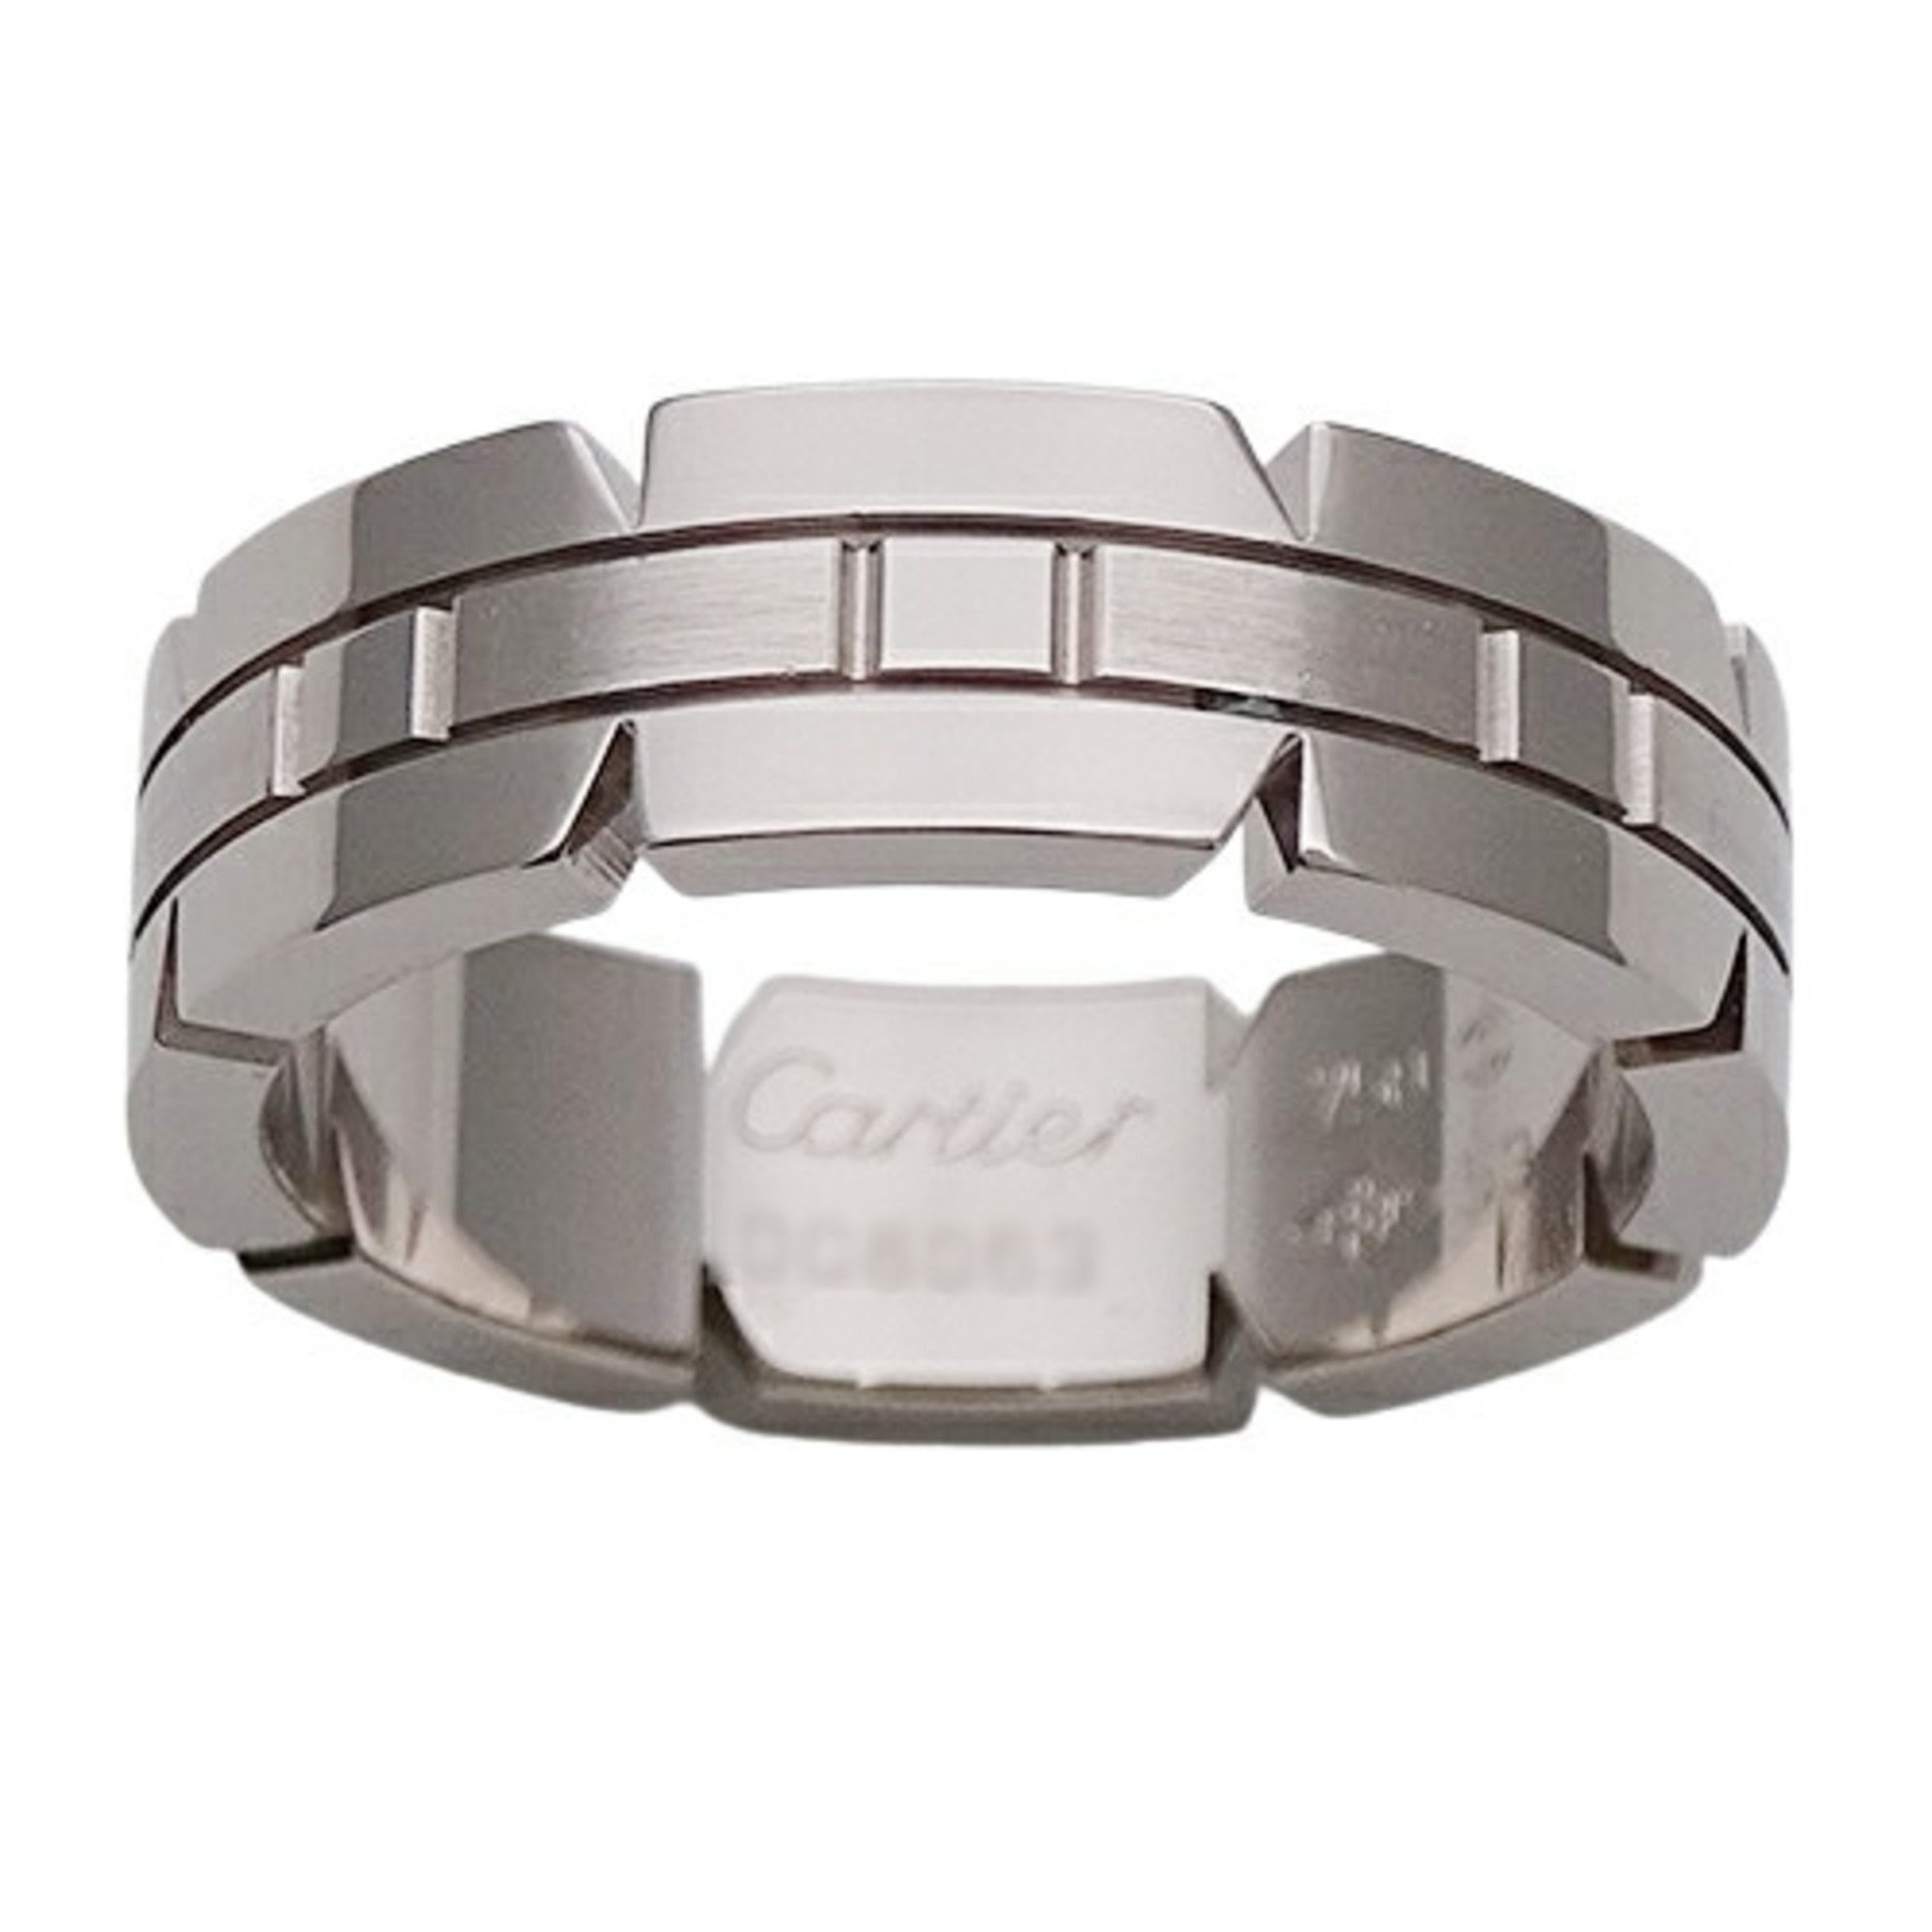 Cartier Ring for Women, 750WG Tank Francaise, White Gold, #53, Size 13, Polished